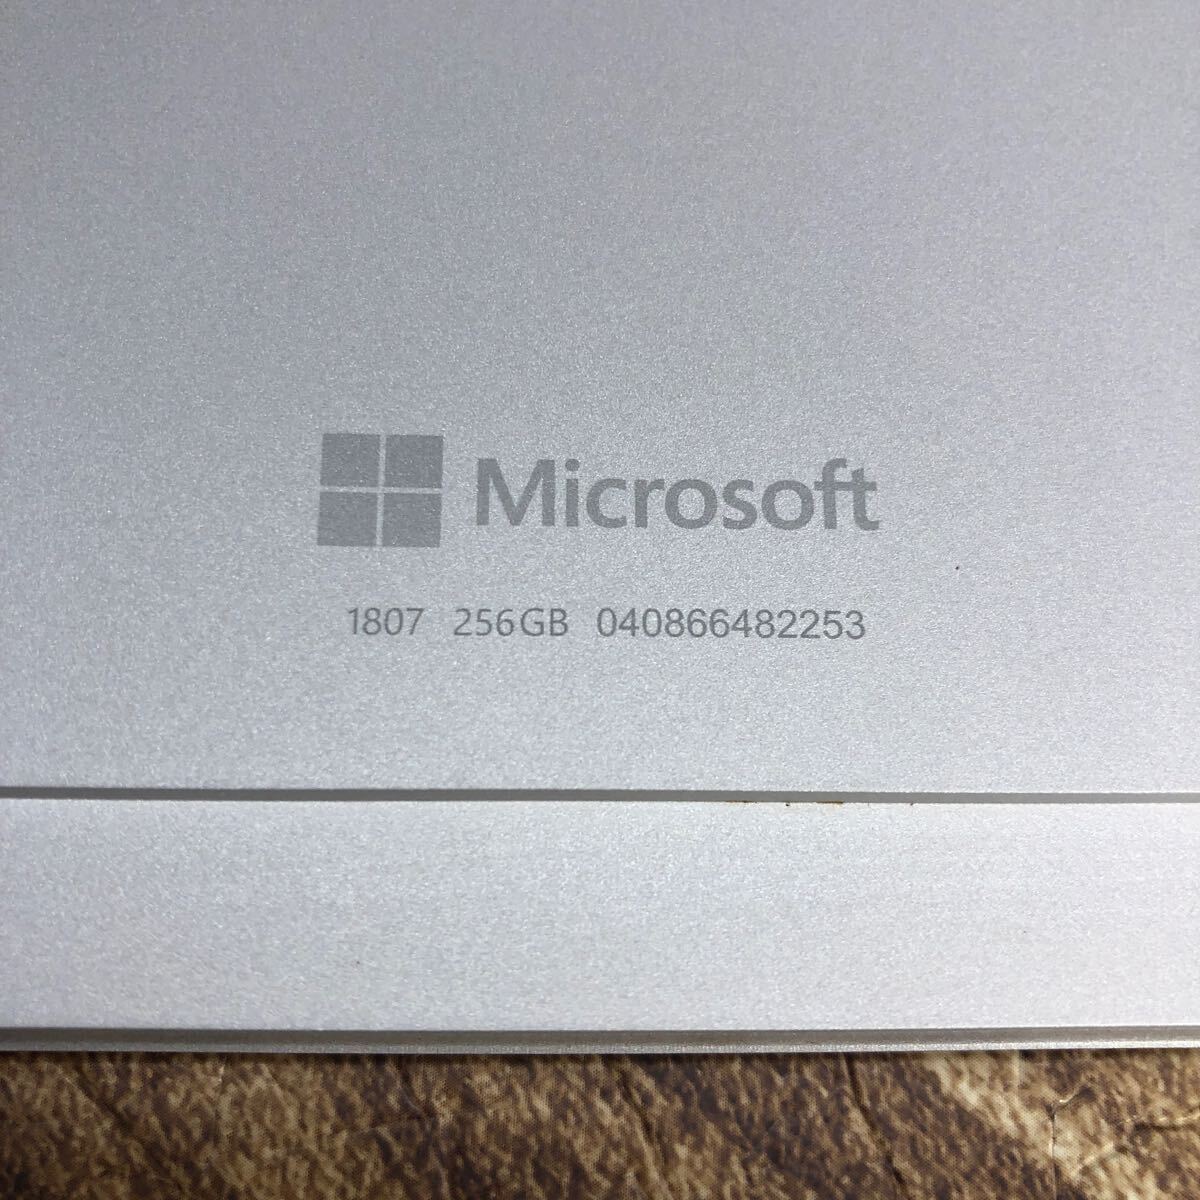 MY5T-41 super-discount tablet PC Microsoft Surface Pro 5 1807 256GB BIOS rising up has confirmed Junk 